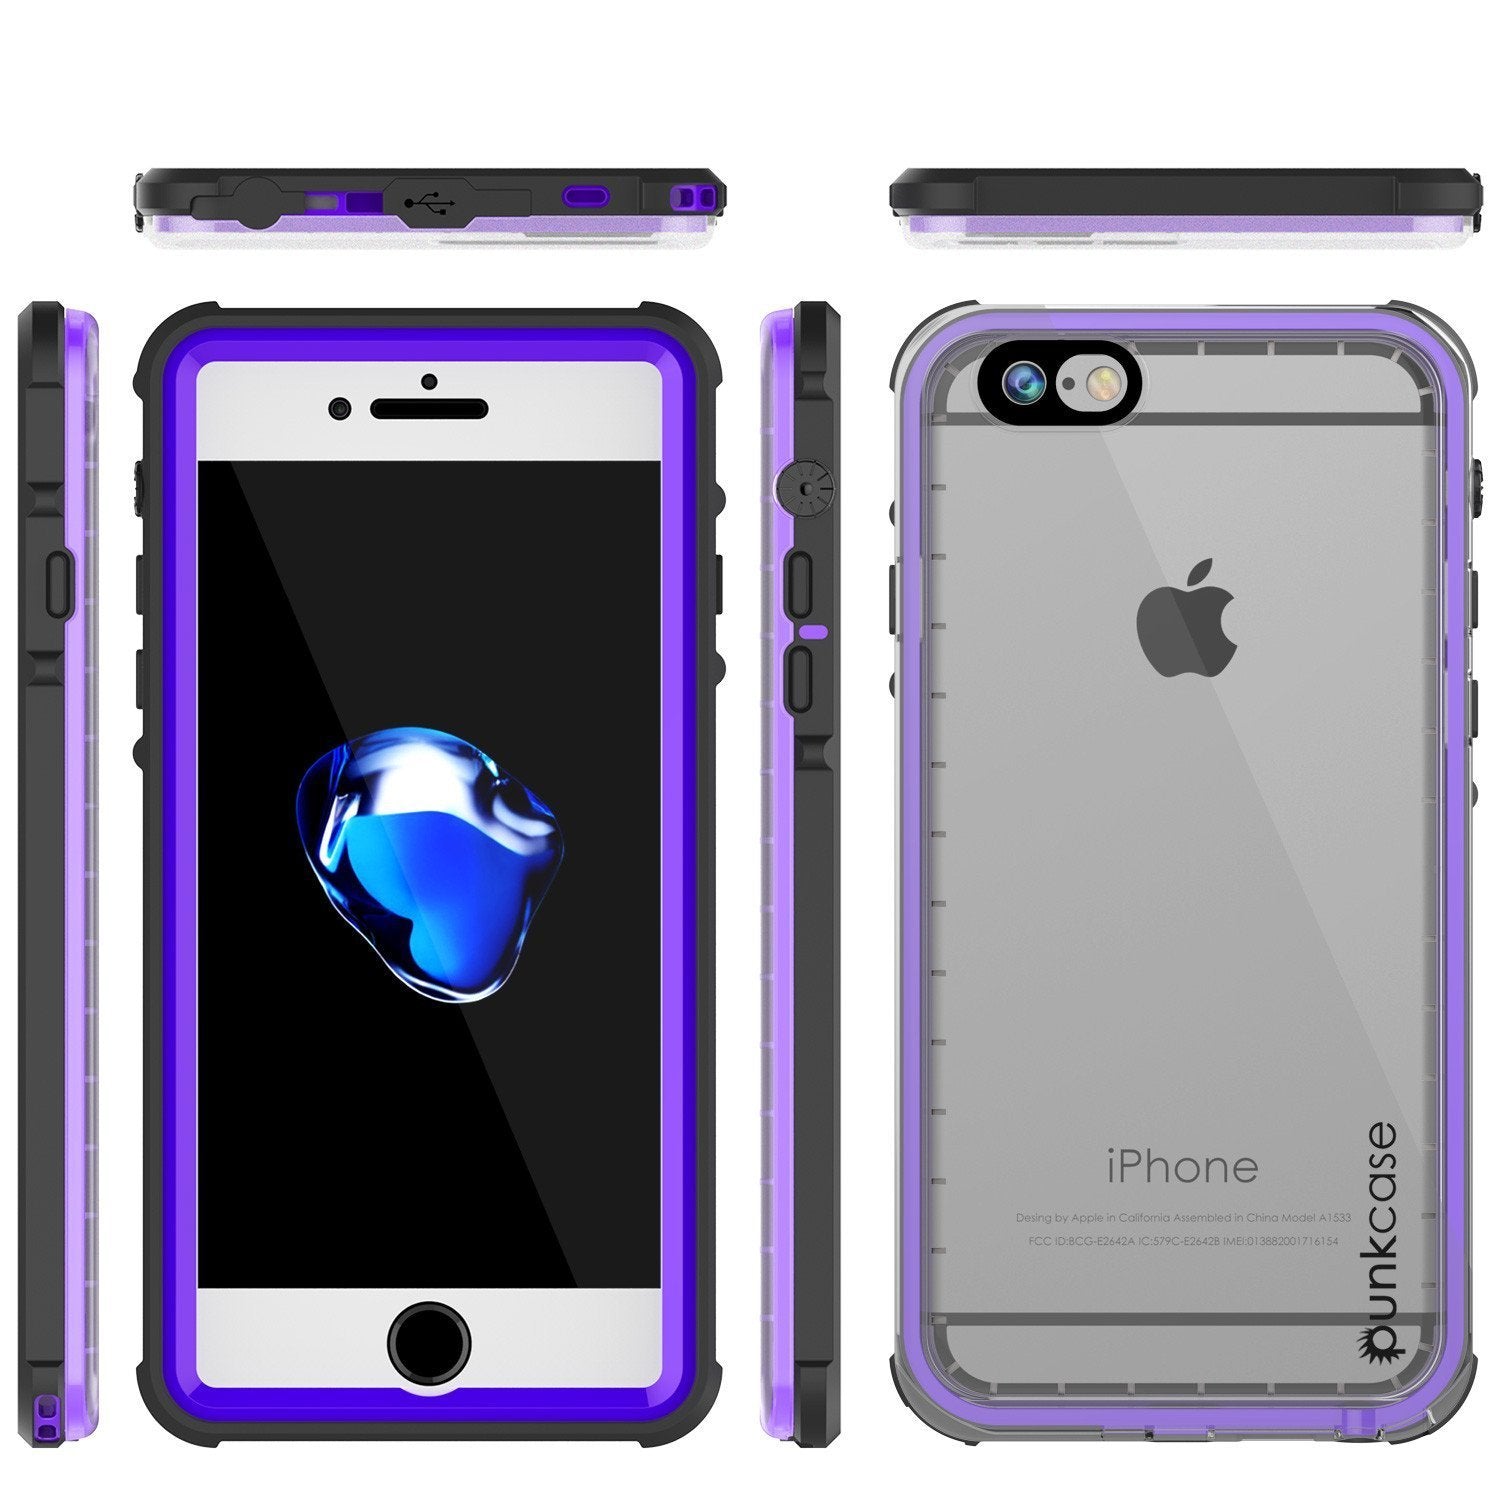 Apple iPhone SE (4.7") Waterproof Case, PUNKcase CRYSTAL Purple W/ Attached Screen Protector  | Warranty (Color in image: Purple)